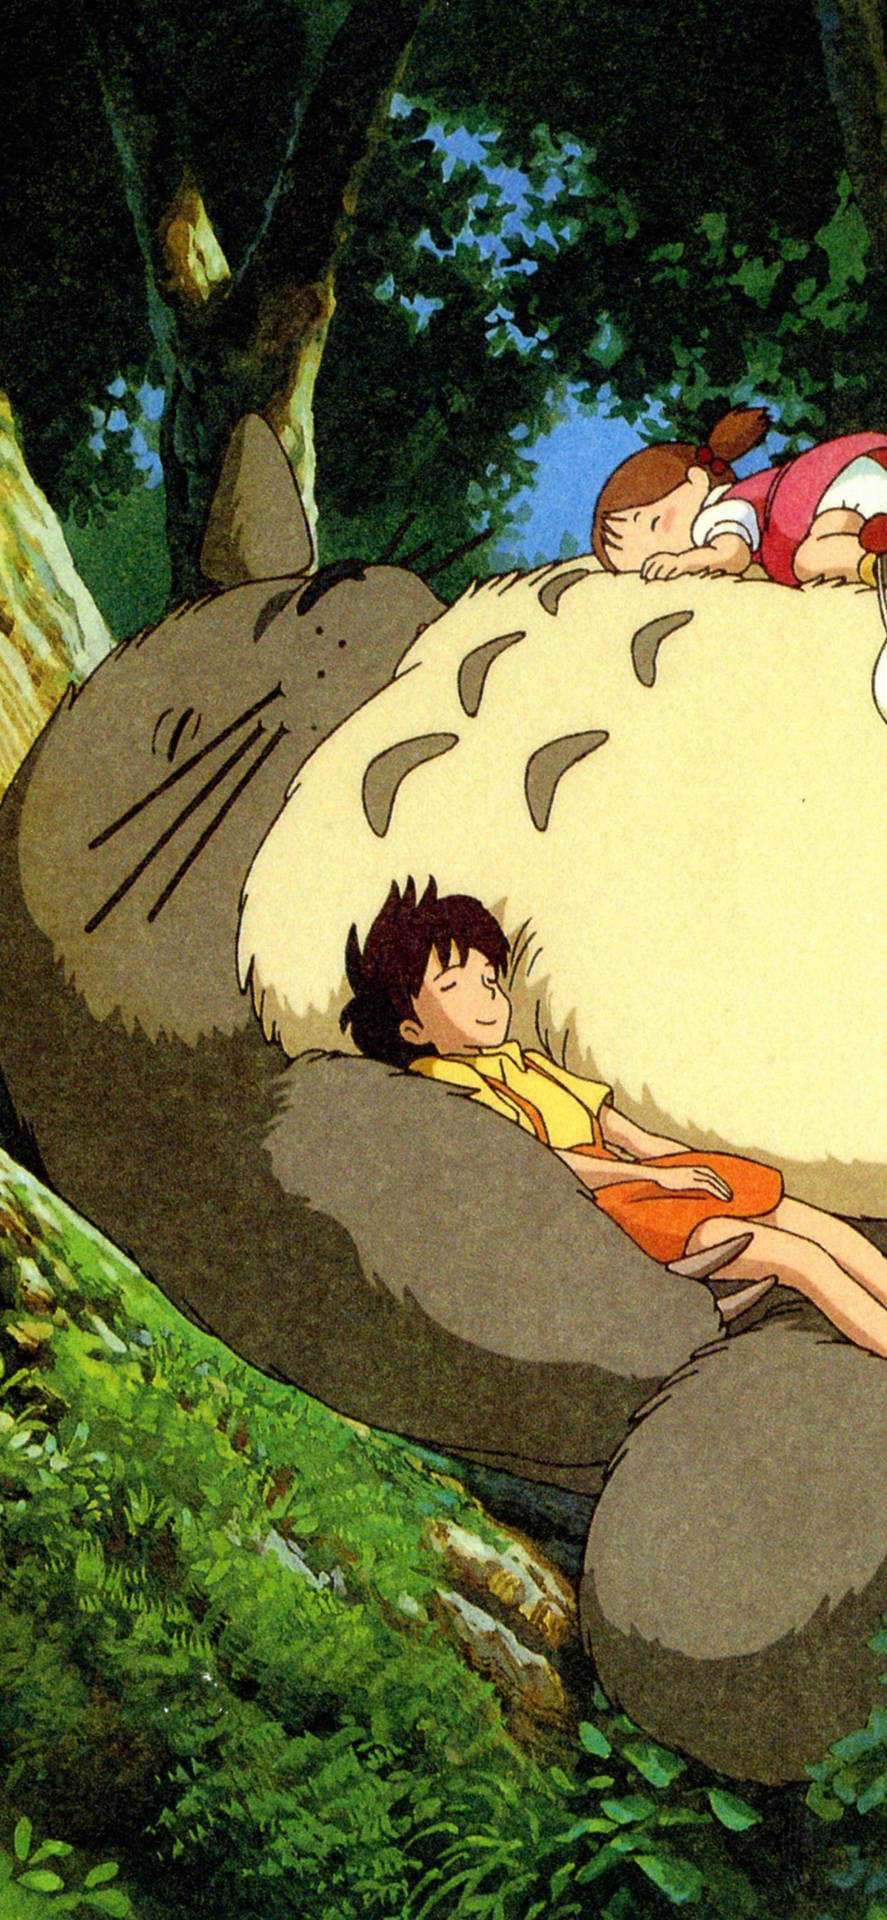 Summon the Spirits of Studio Ghibli with this iPhone! Wallpaper